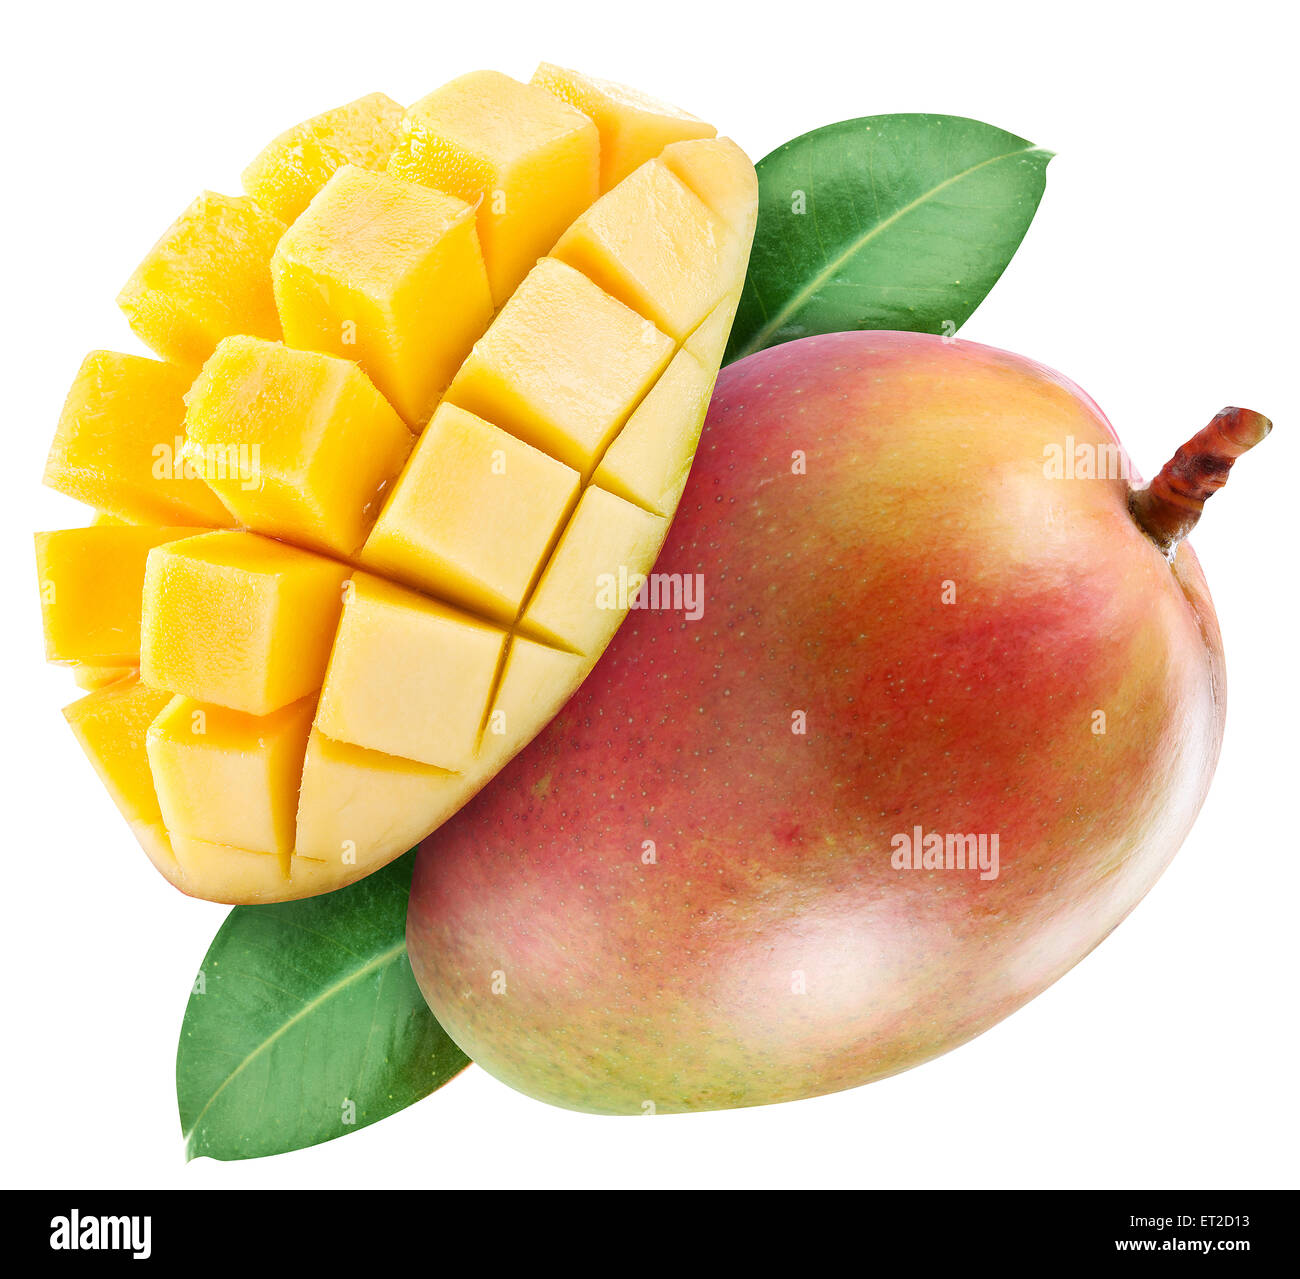 Ripe mango fruit. File contains clipping paths. Stock Photo